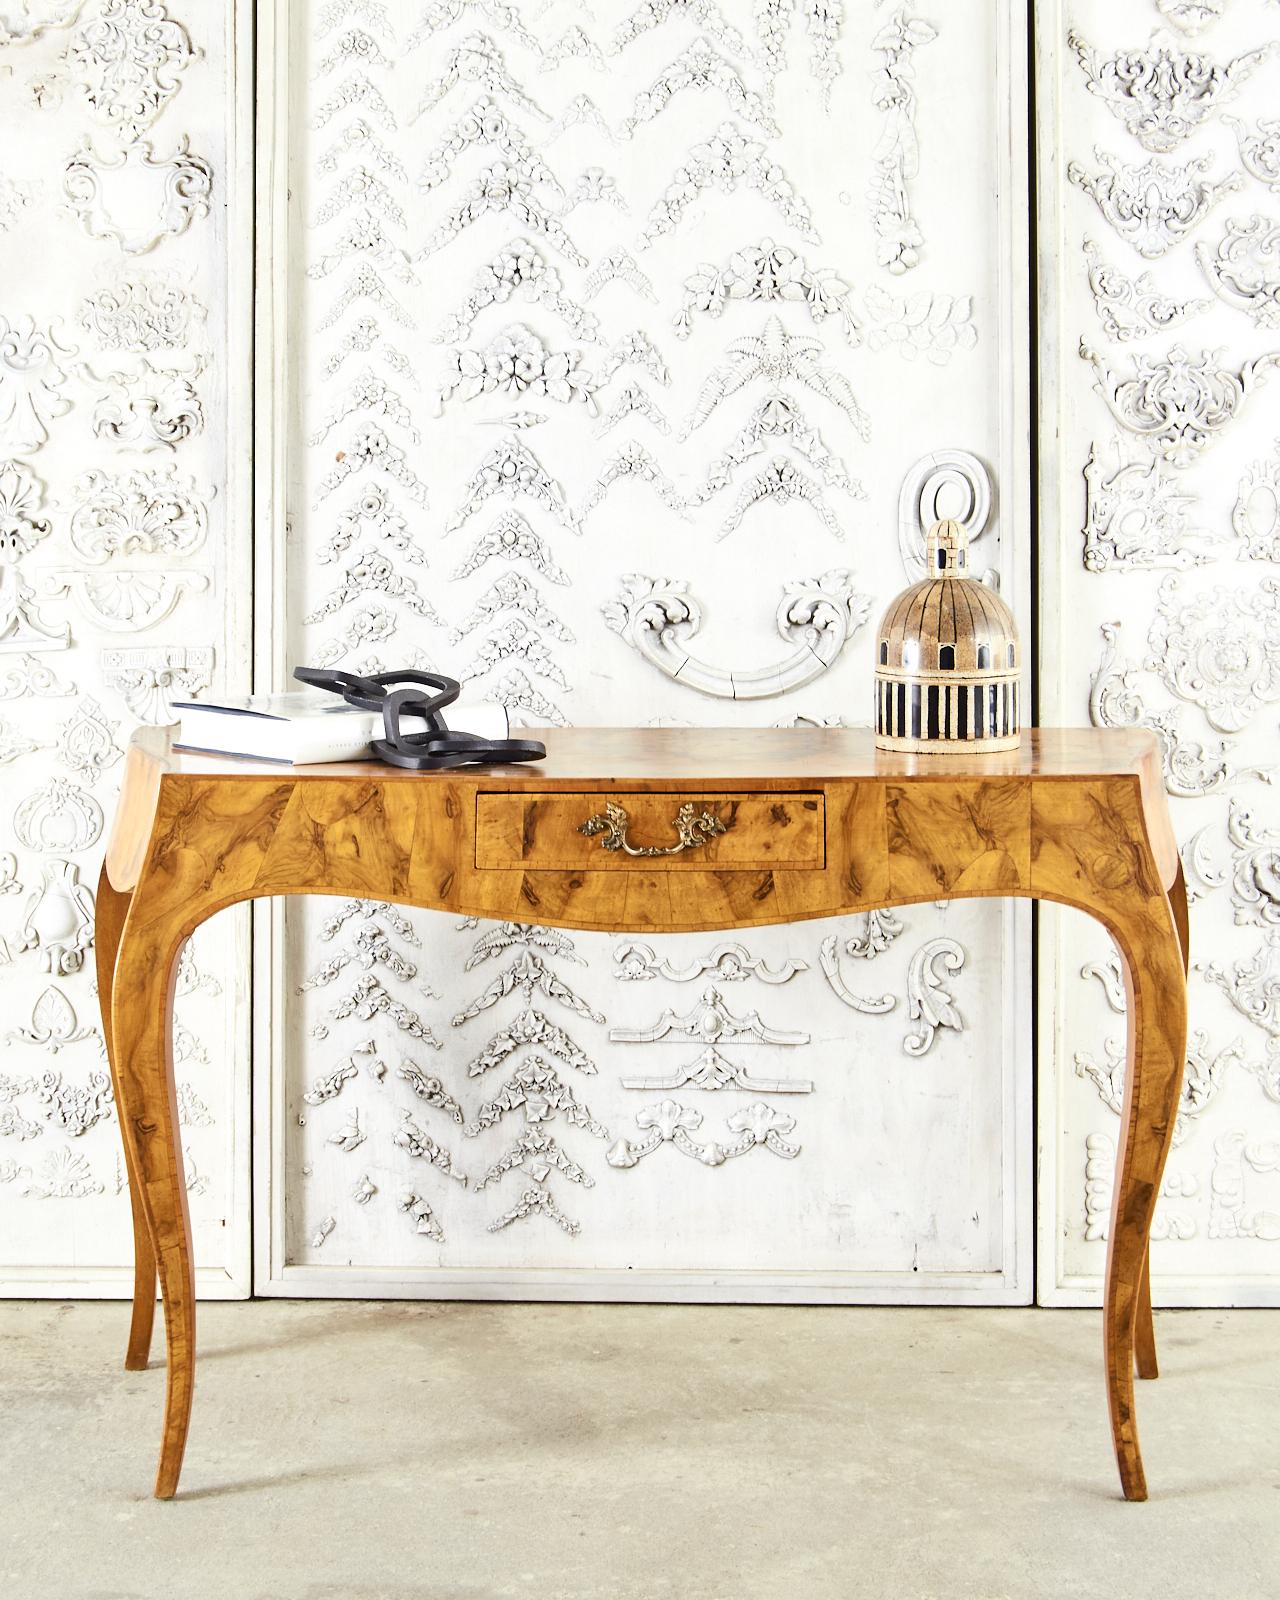 Fantastic Italian ladies writing table or console table featuring a rich burlwood veneer. The frame has elegant curves with graceful serpentine aprons and cabriole style legs. Made in the grand Rococo style. Centered by a single storage drawer the